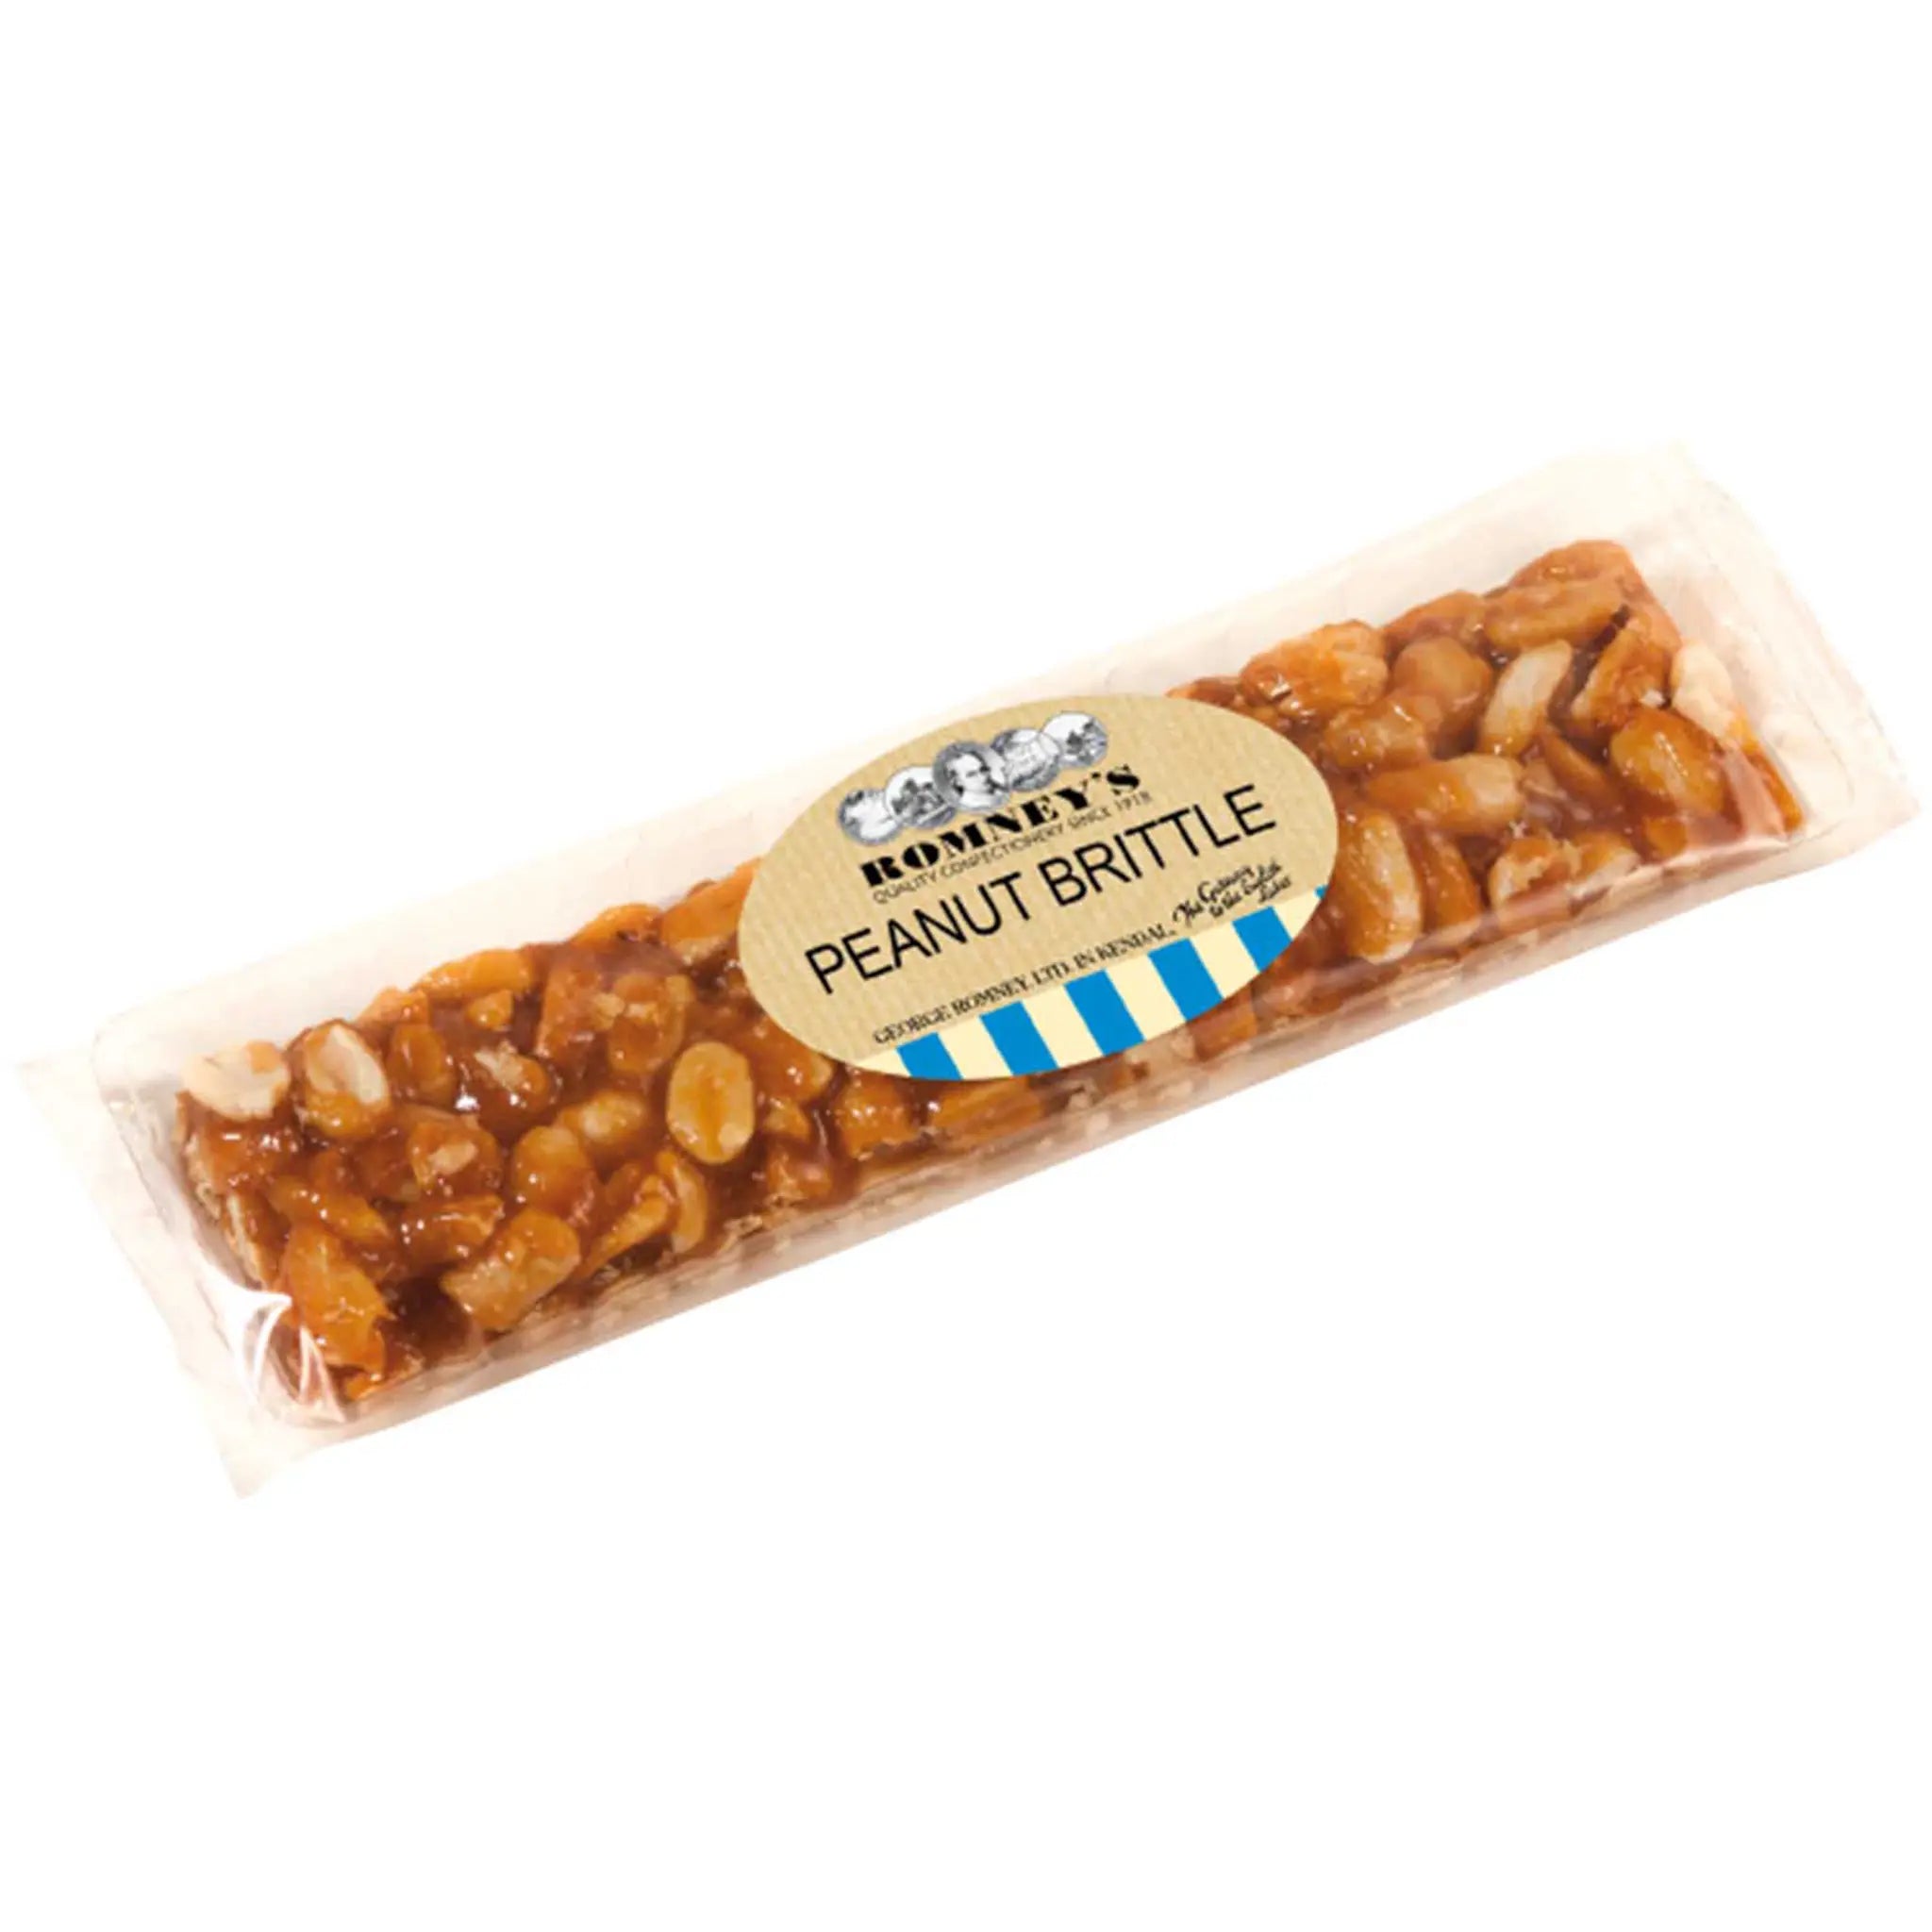 A product image that shows a confectionery bar of peanut brittle in a transparent wrapper. There is a label on the product featuring the Romney's logo and the words 'Peanut Brittle'.